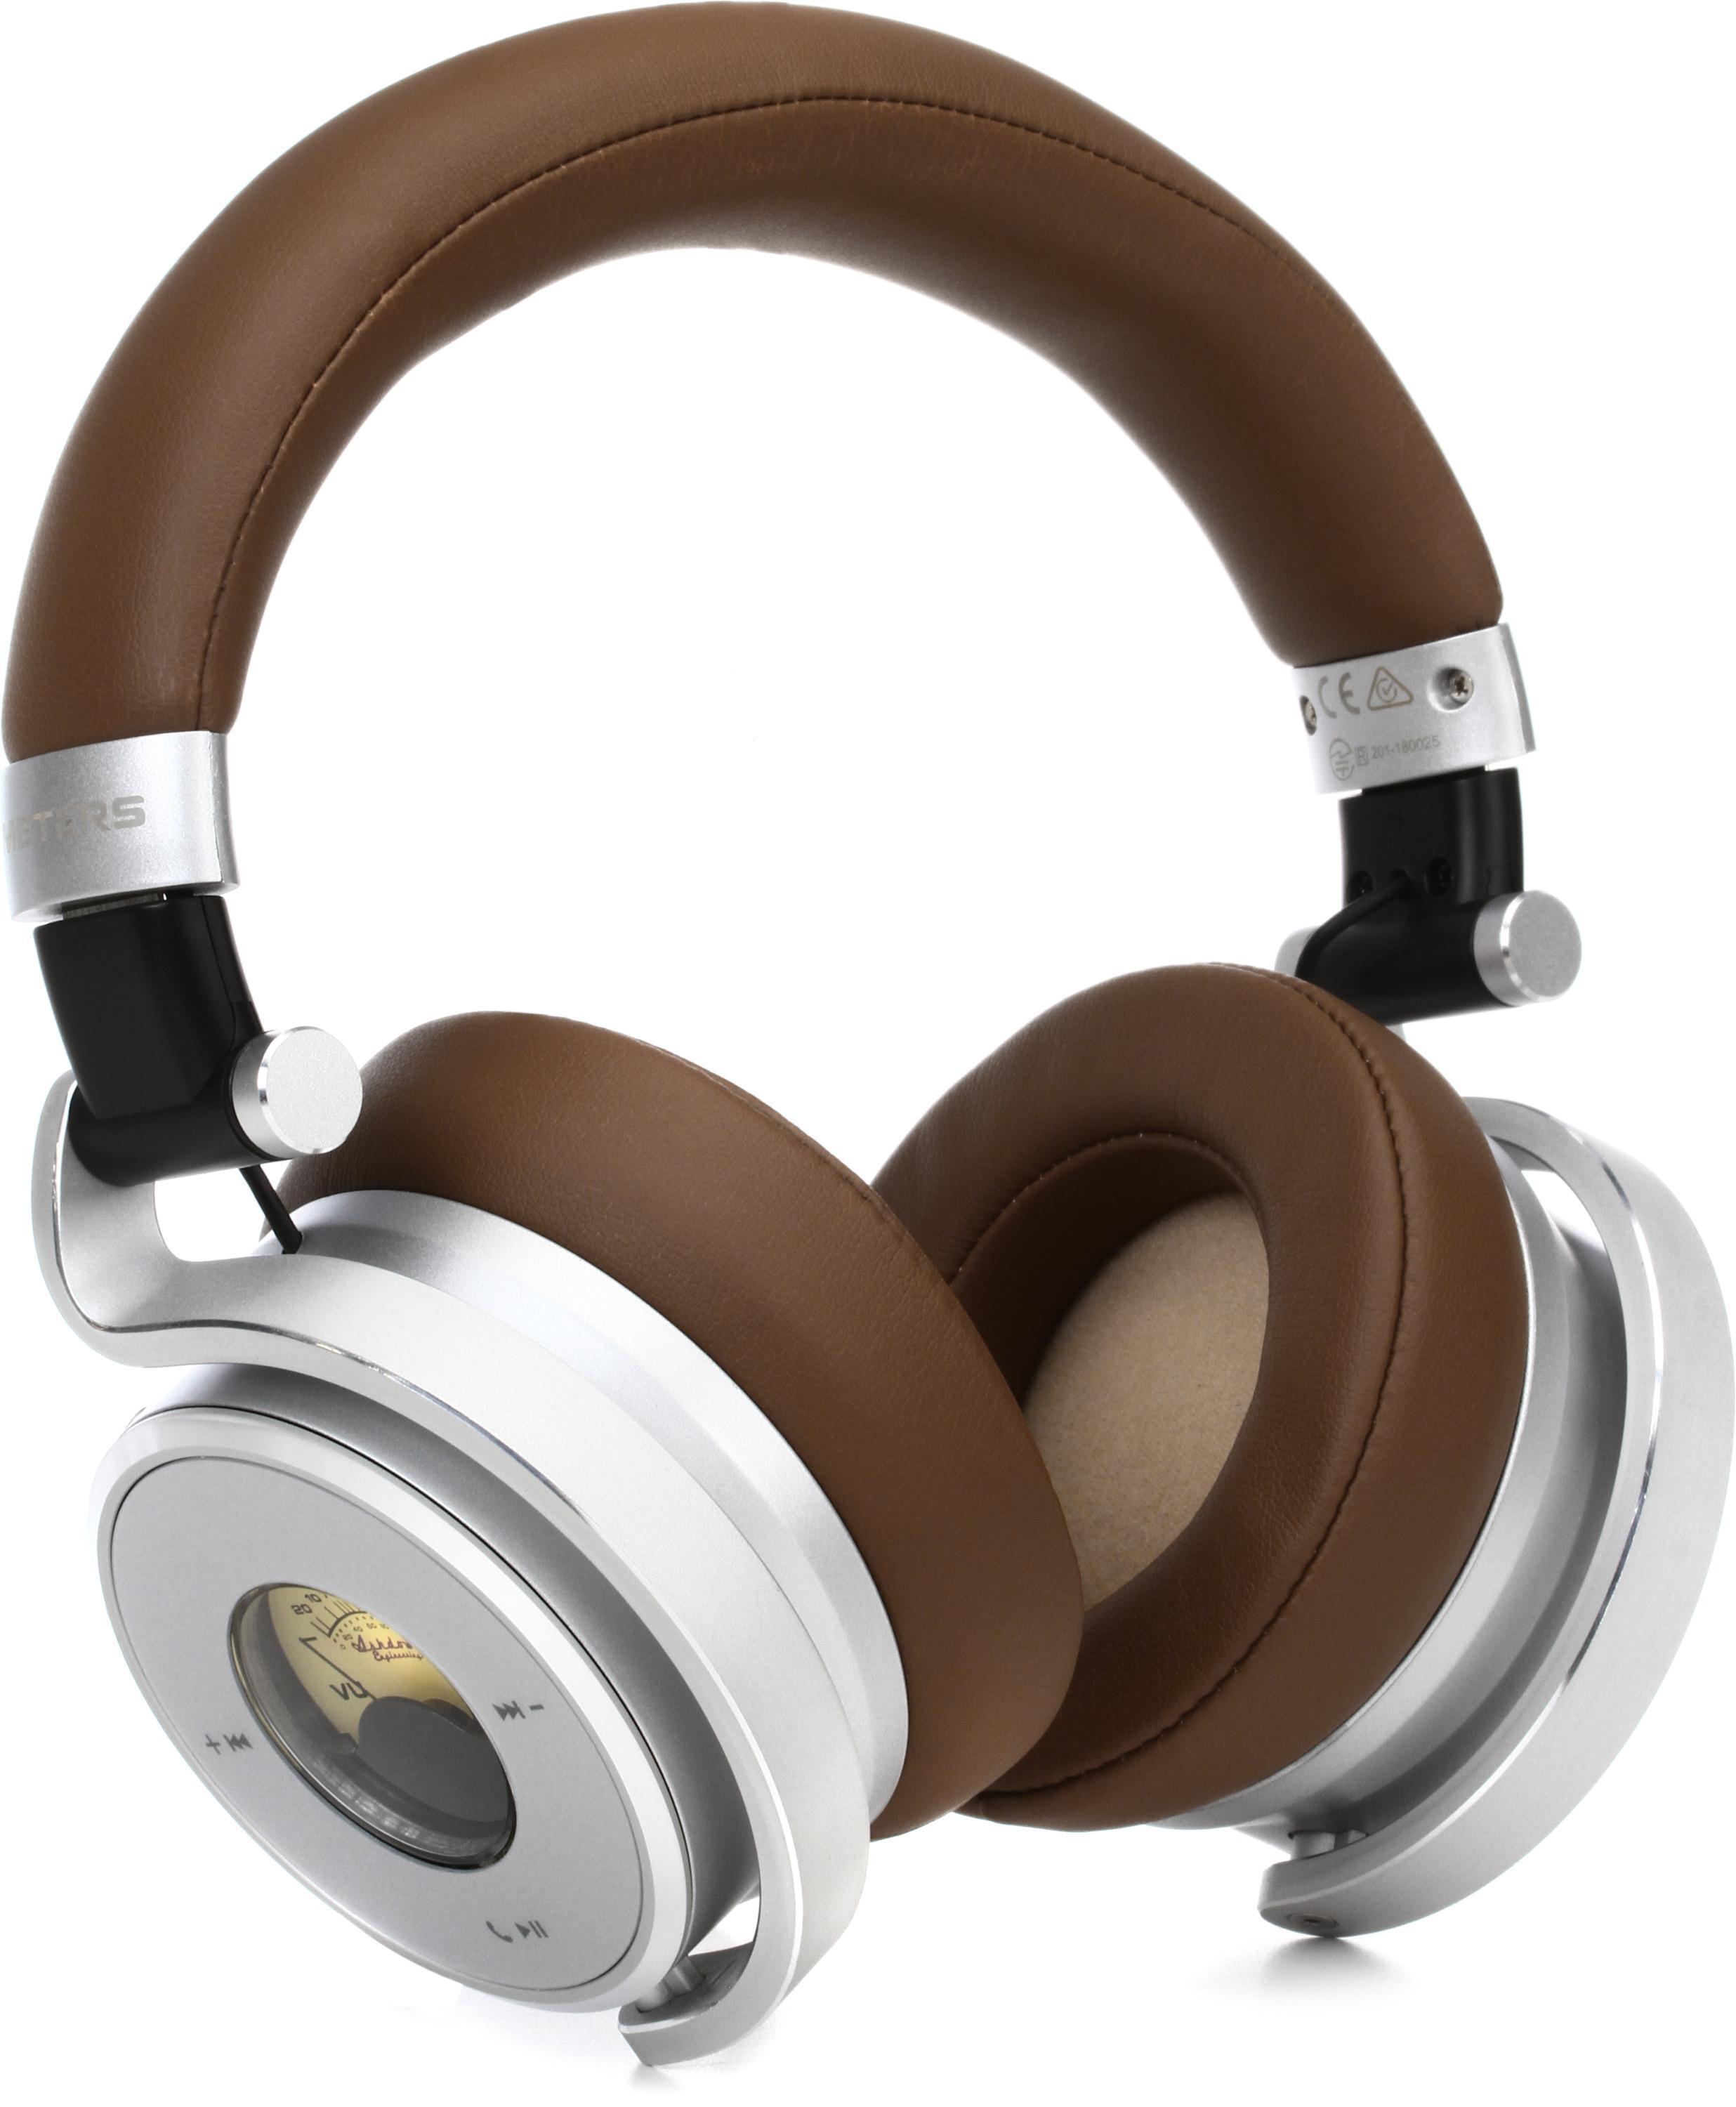 Meters OV-1-B-Connect Over-ear Active Noise Canceling Bluetooth